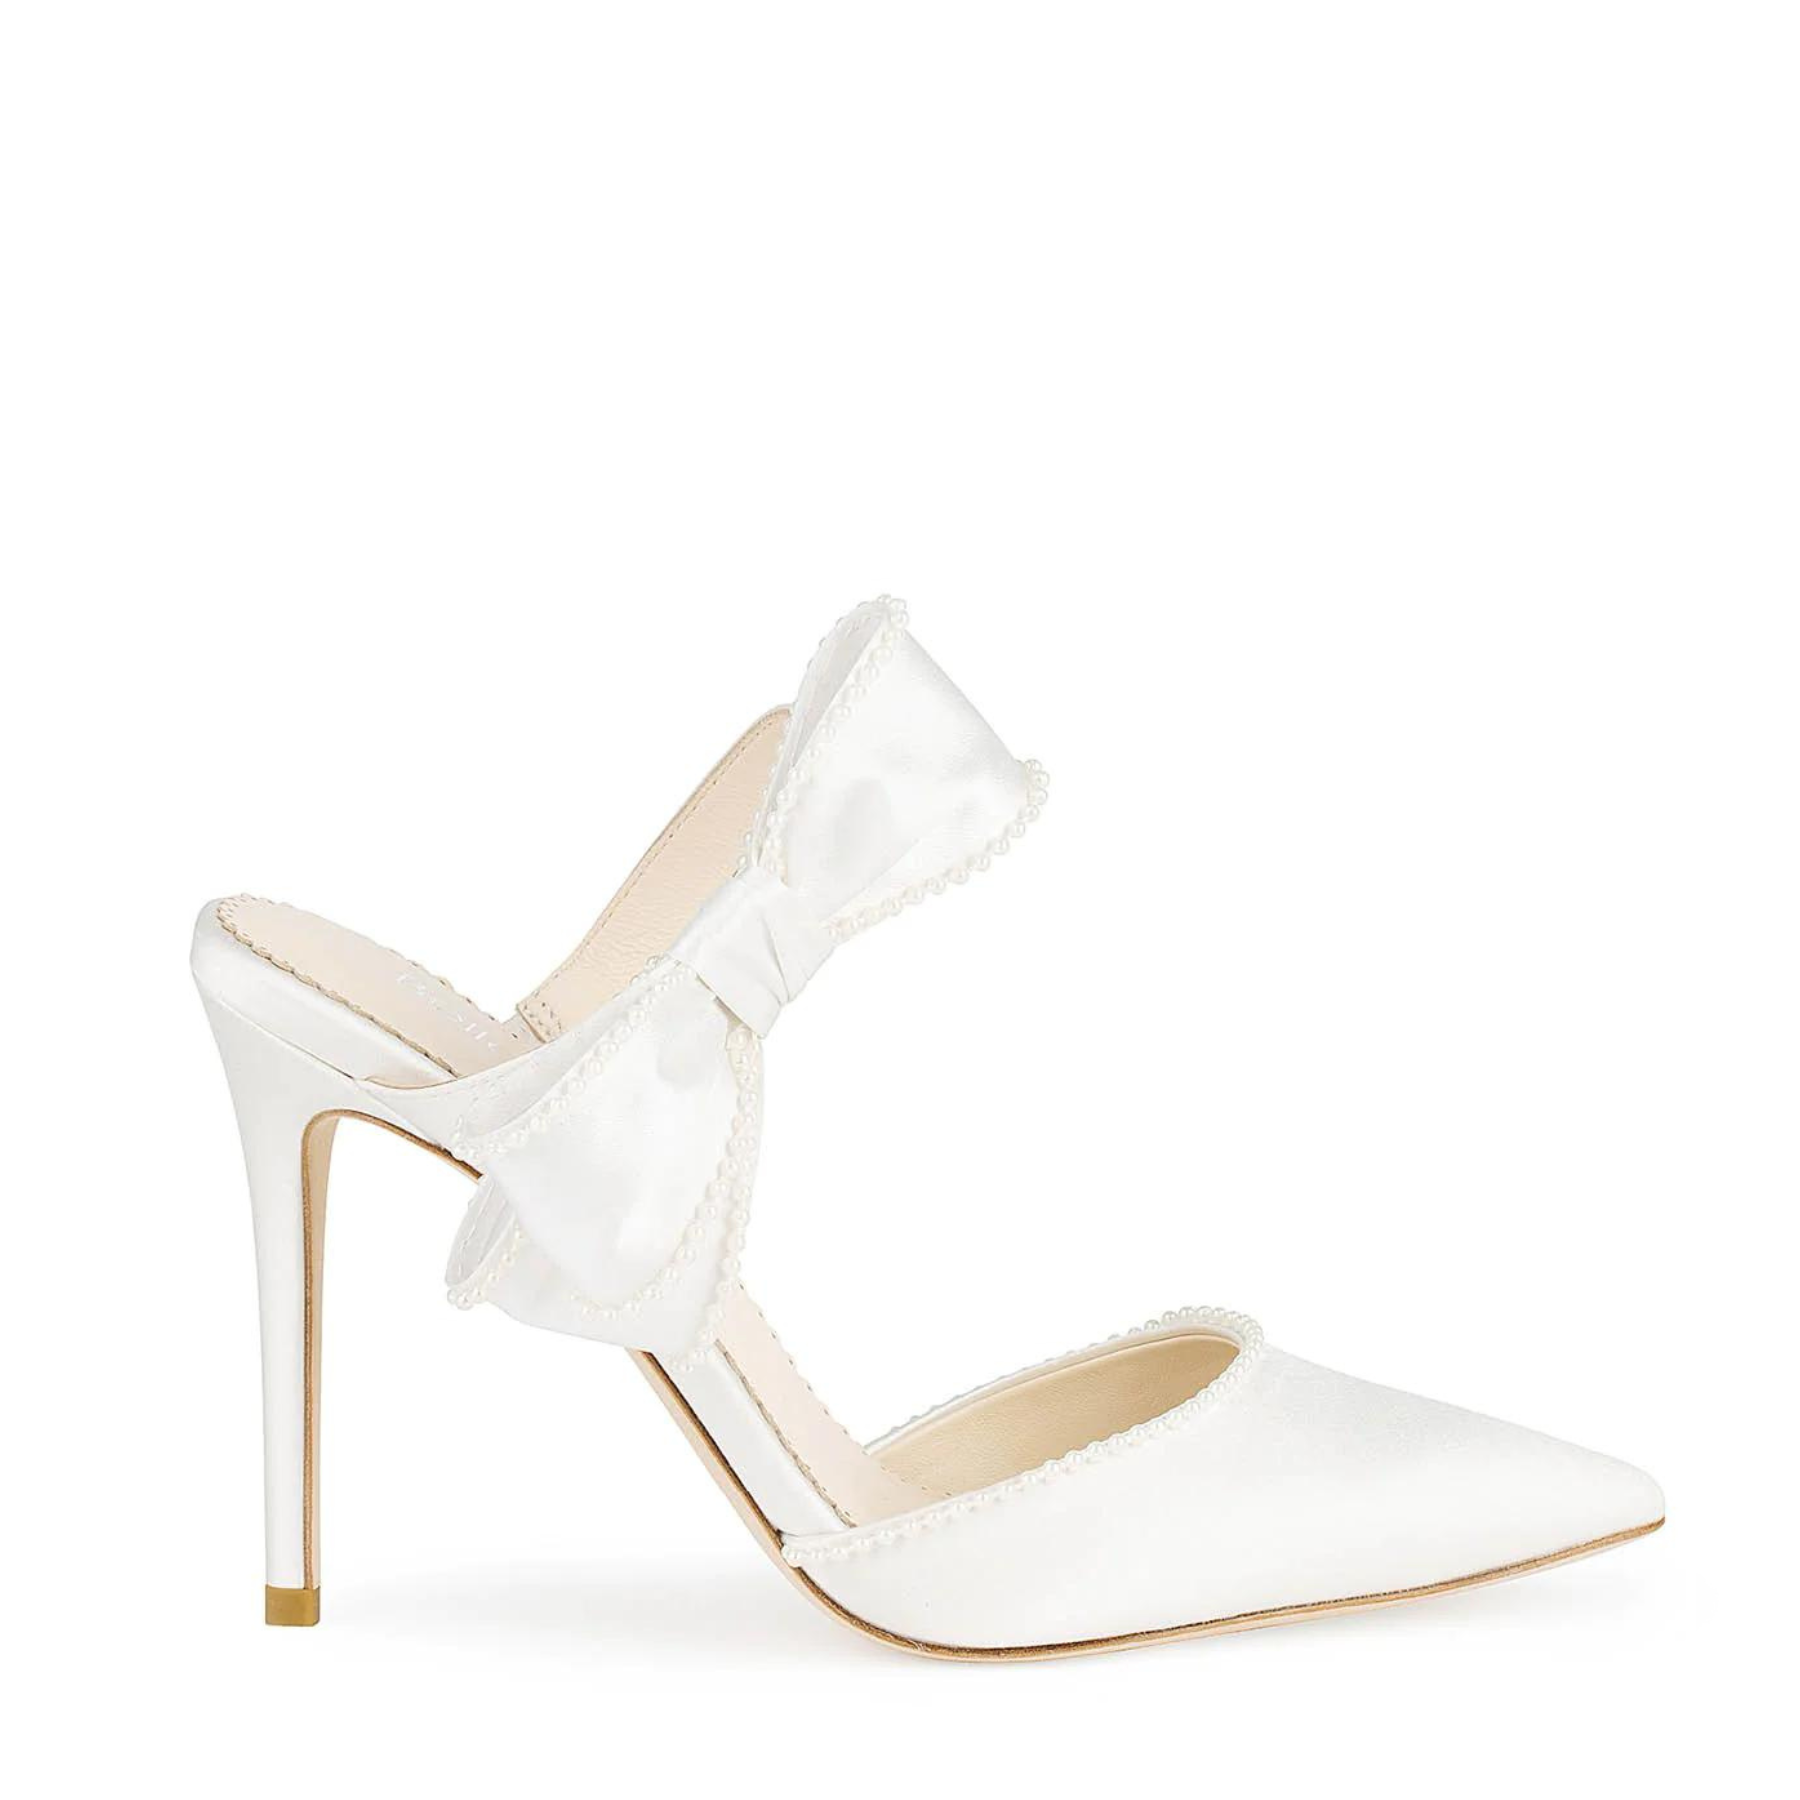 Designer Wedding Shoes | The White Collection Au | The White Collection